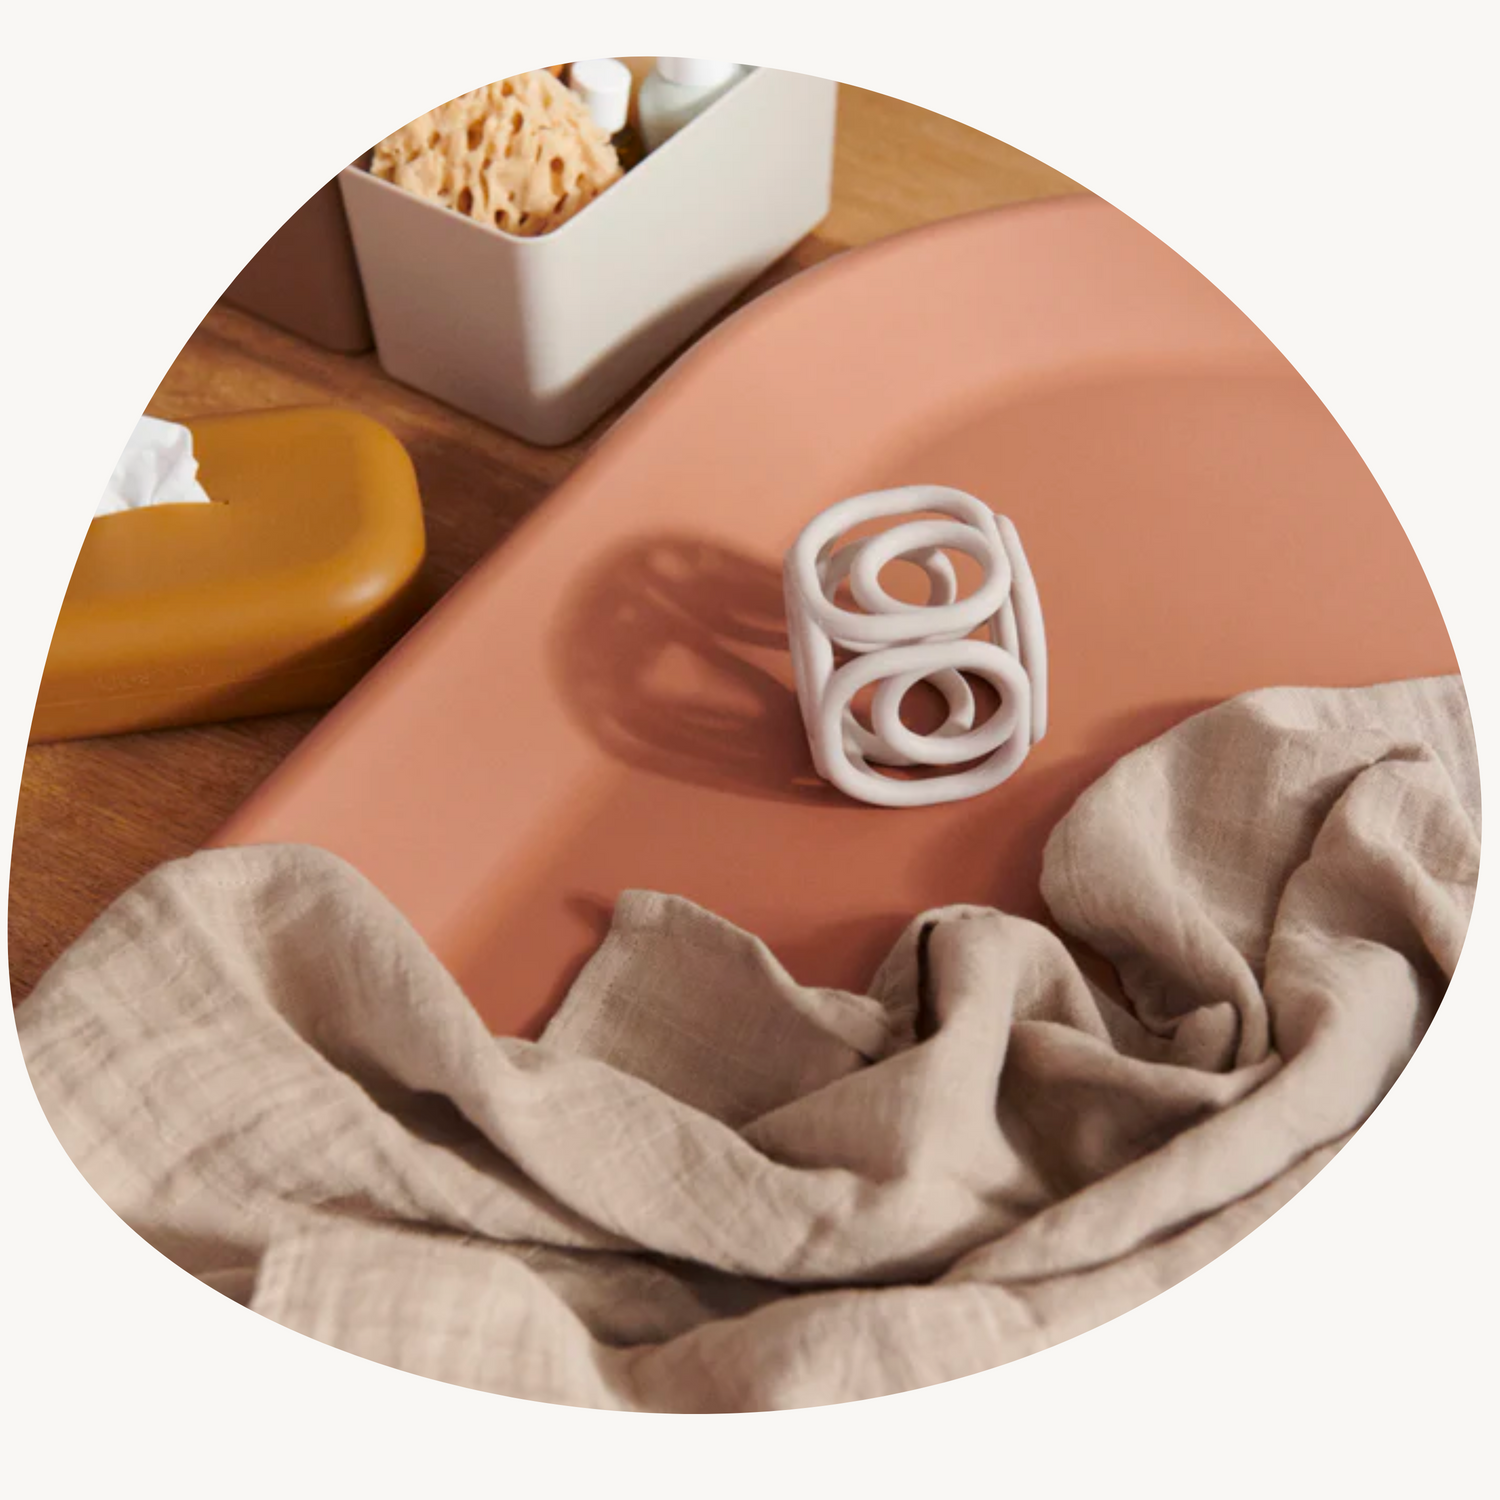 Discover a blend of comfort and functionality with The Silicone Collection. Our materials are selected to provide your little ones with safe and sustainable items.